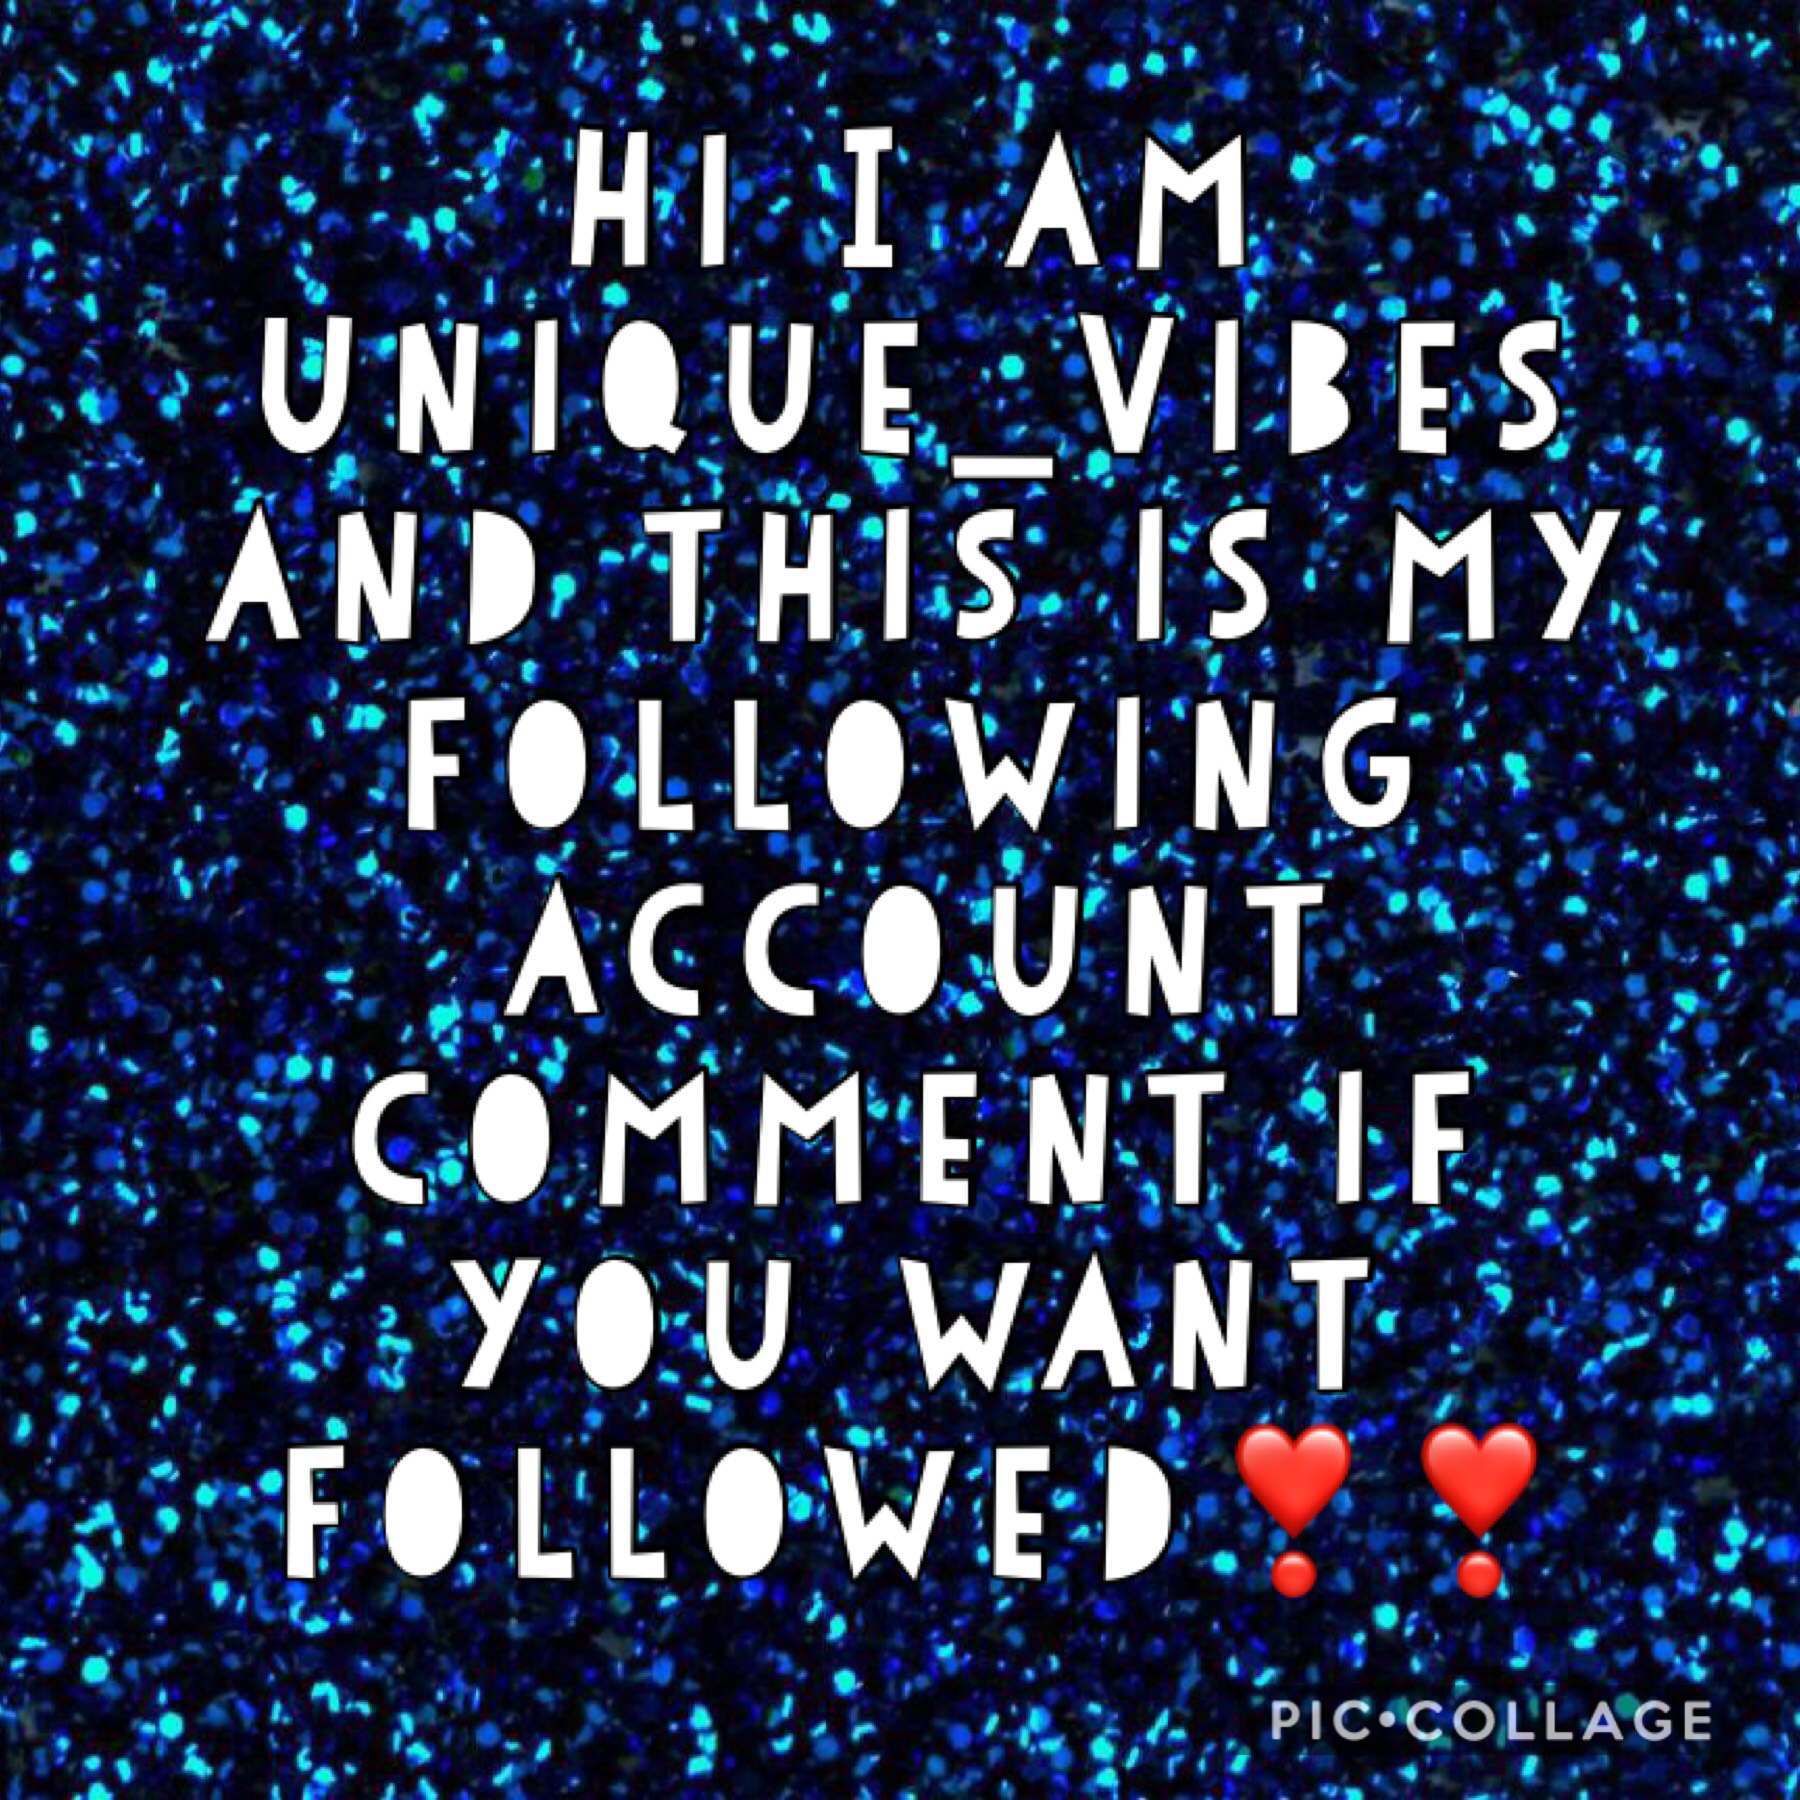 Comment if you want followed 